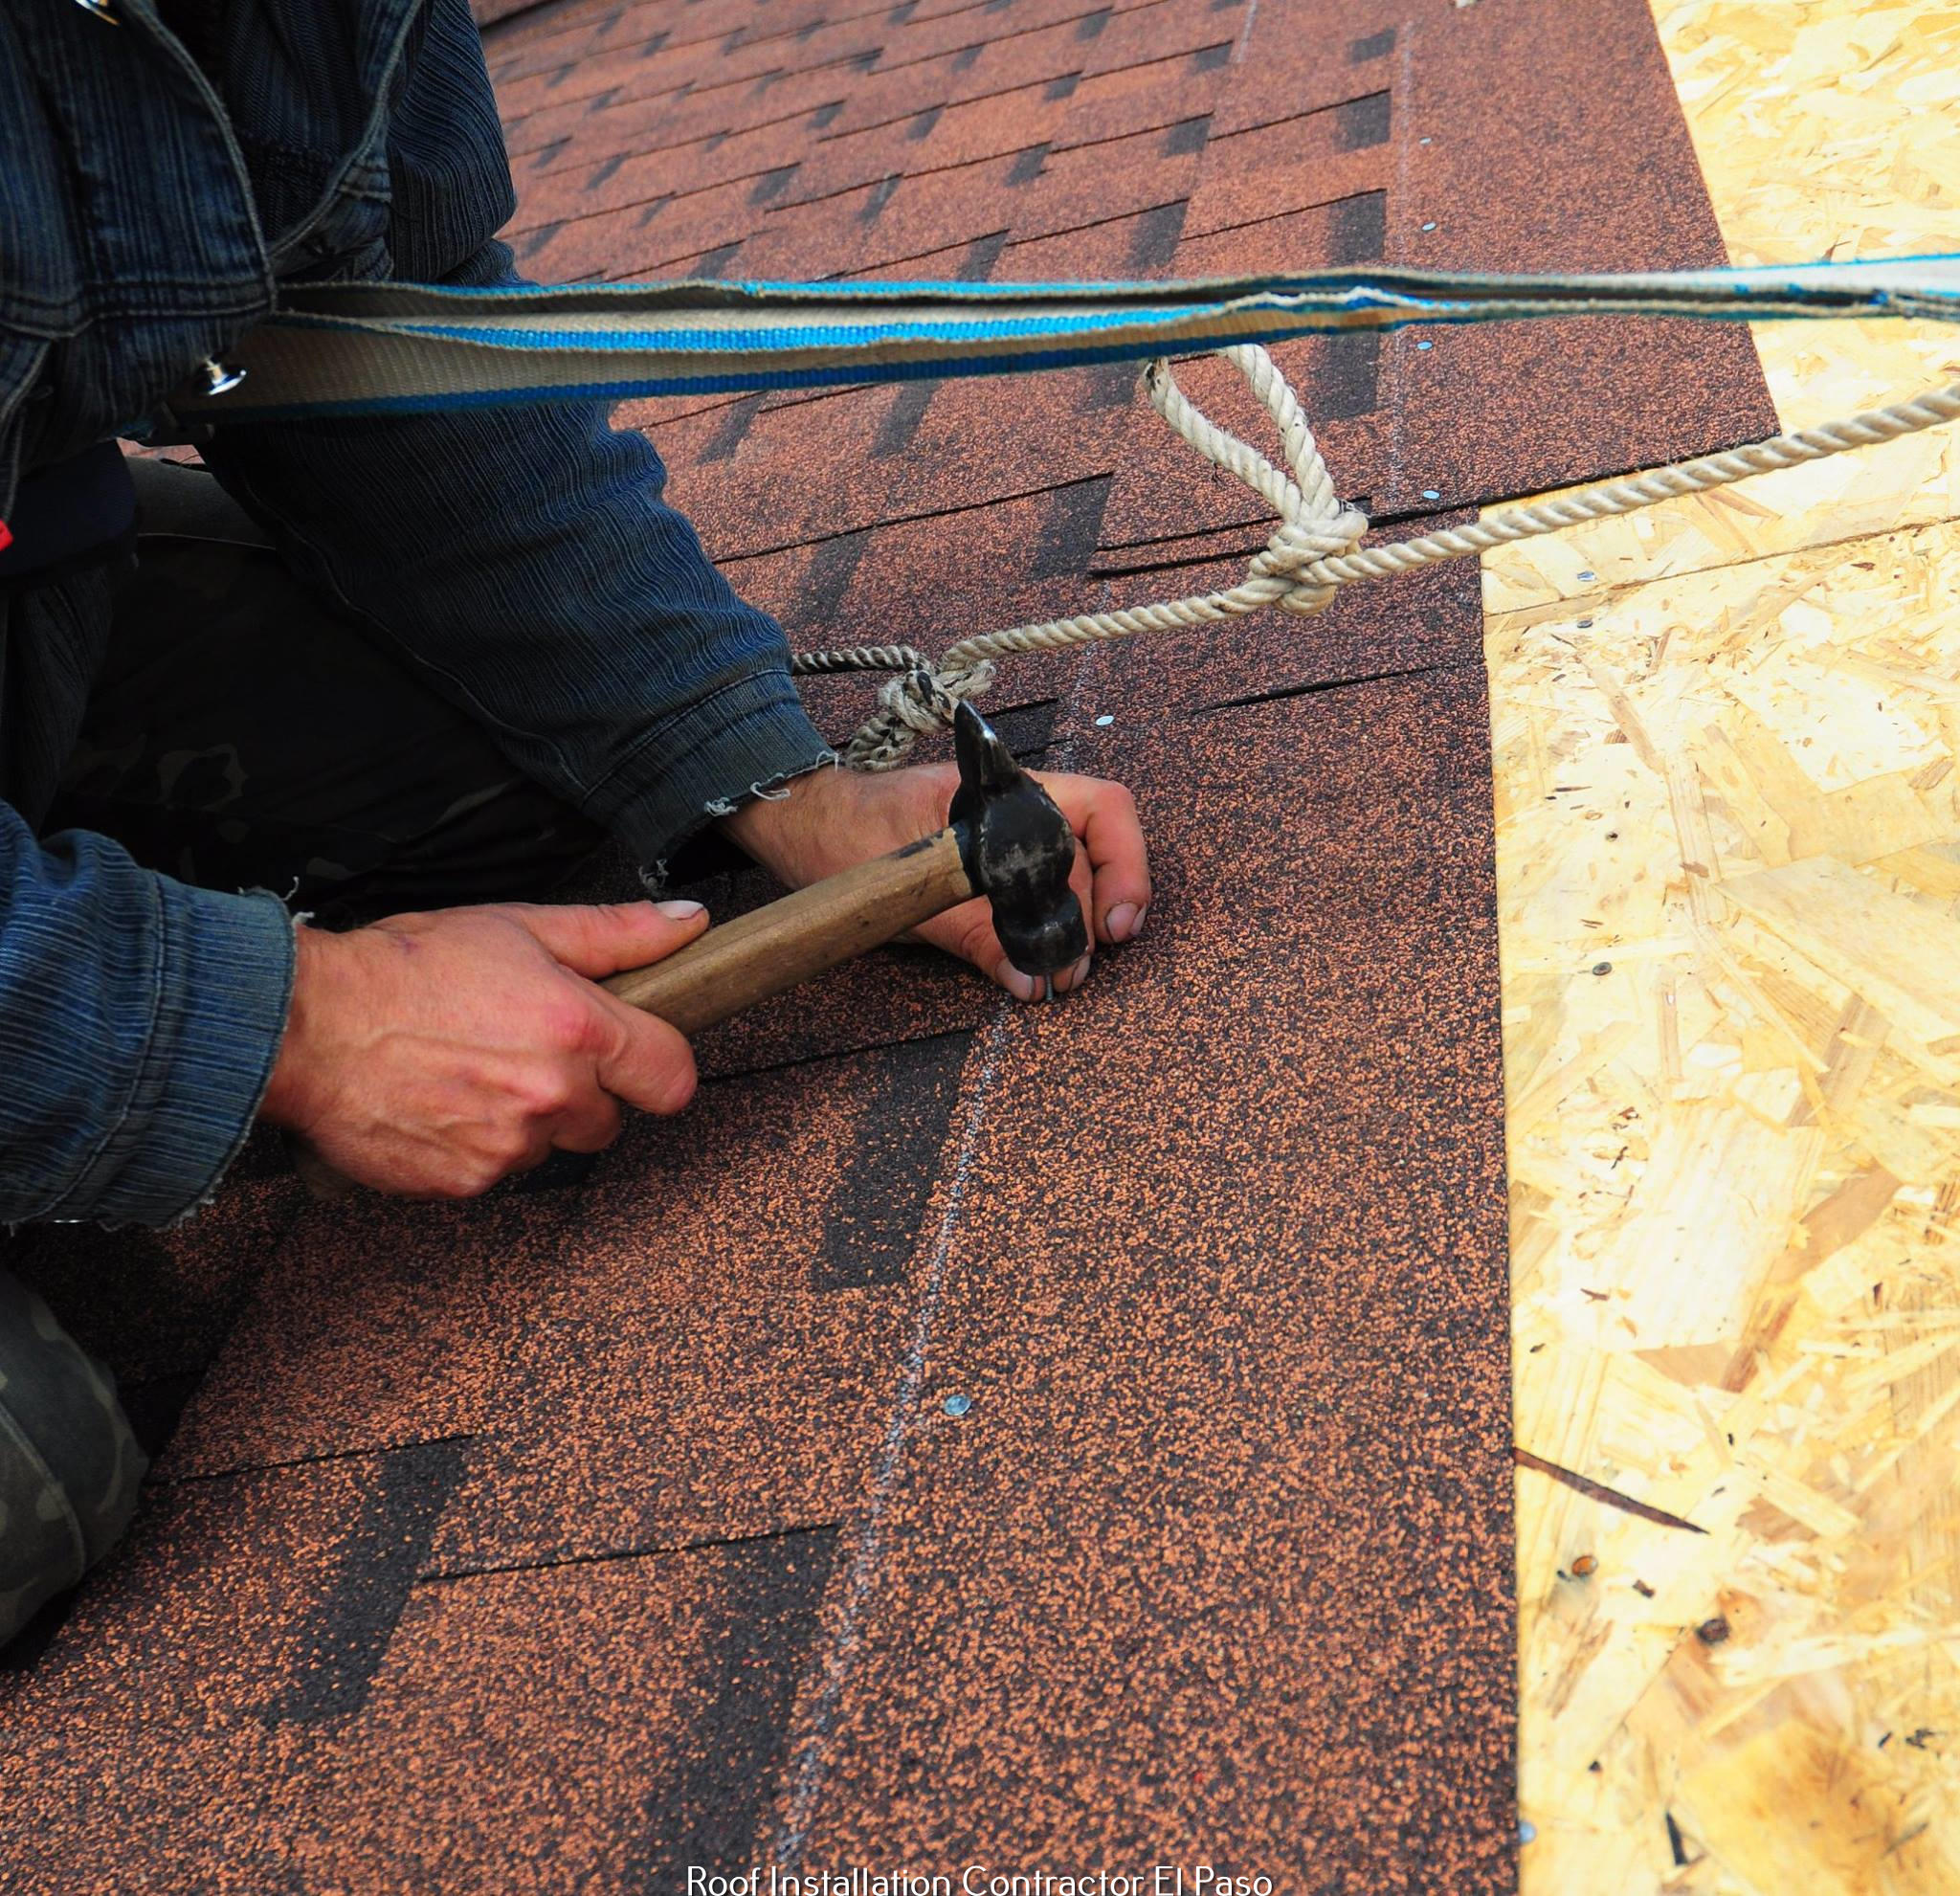 Noah's Roofing & Construction Advises Against DIY Roofing 